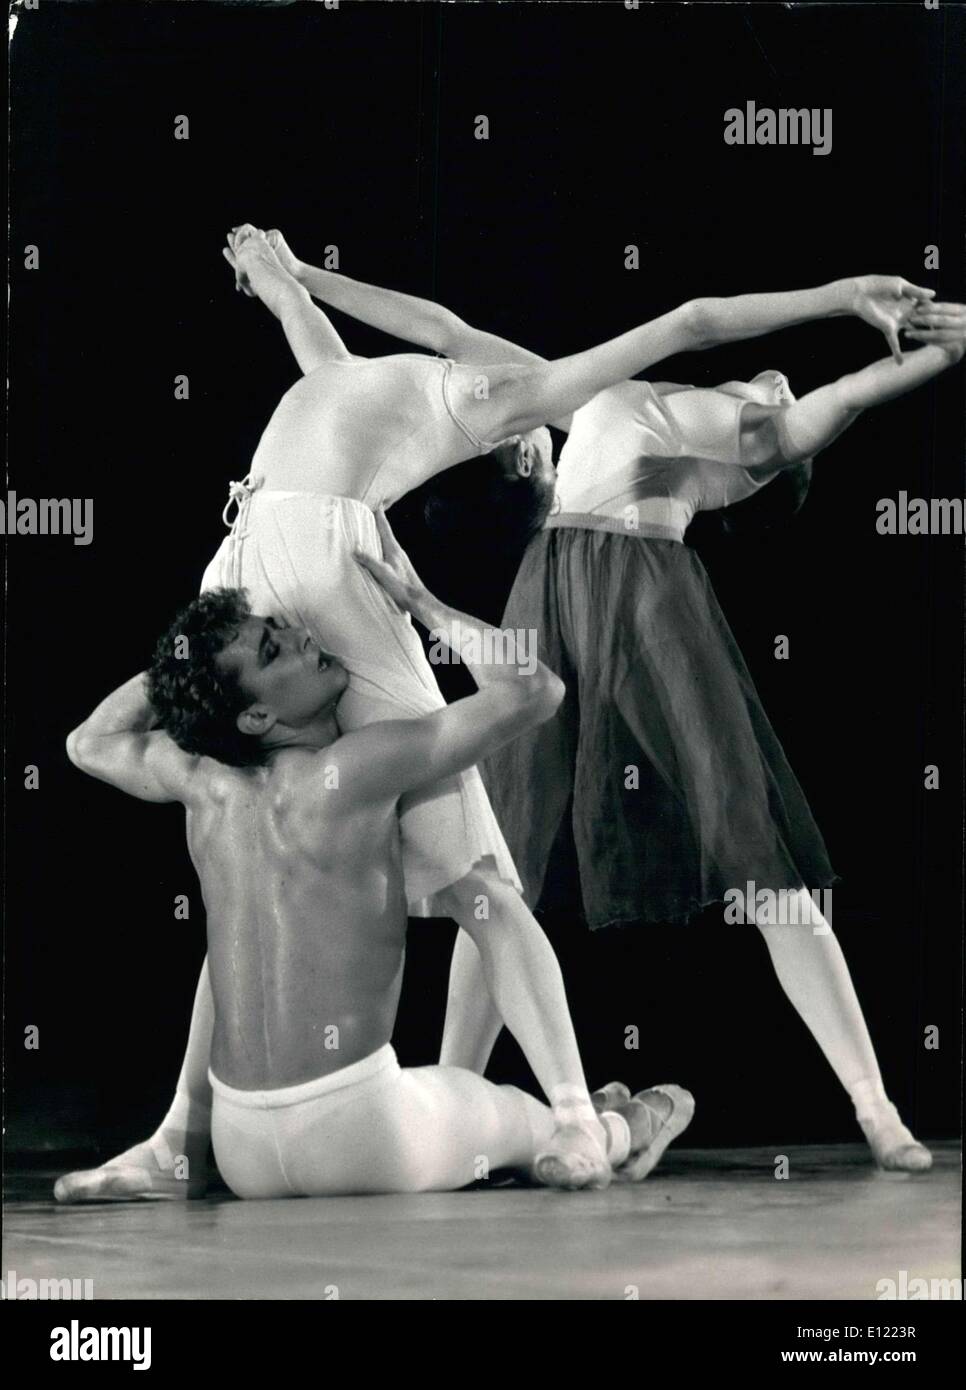 Dec. 20, 1982 - They are performing at the Champs-Elysees Theater. The ballet is set to music by Claude Debussy. : Stock Photo